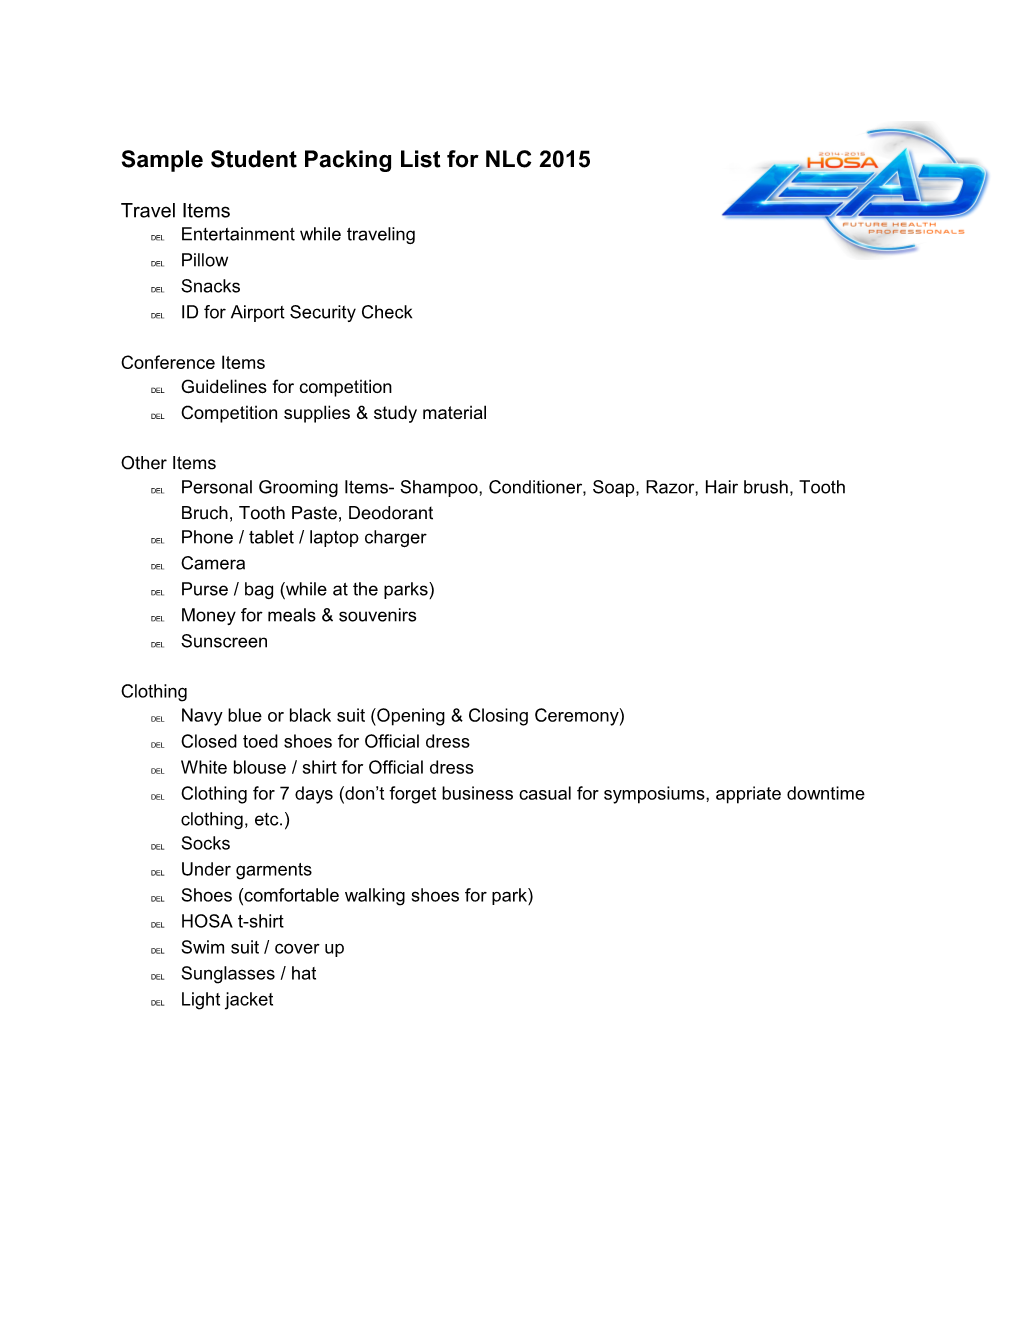 Sample Student Packing List for NLC 2015